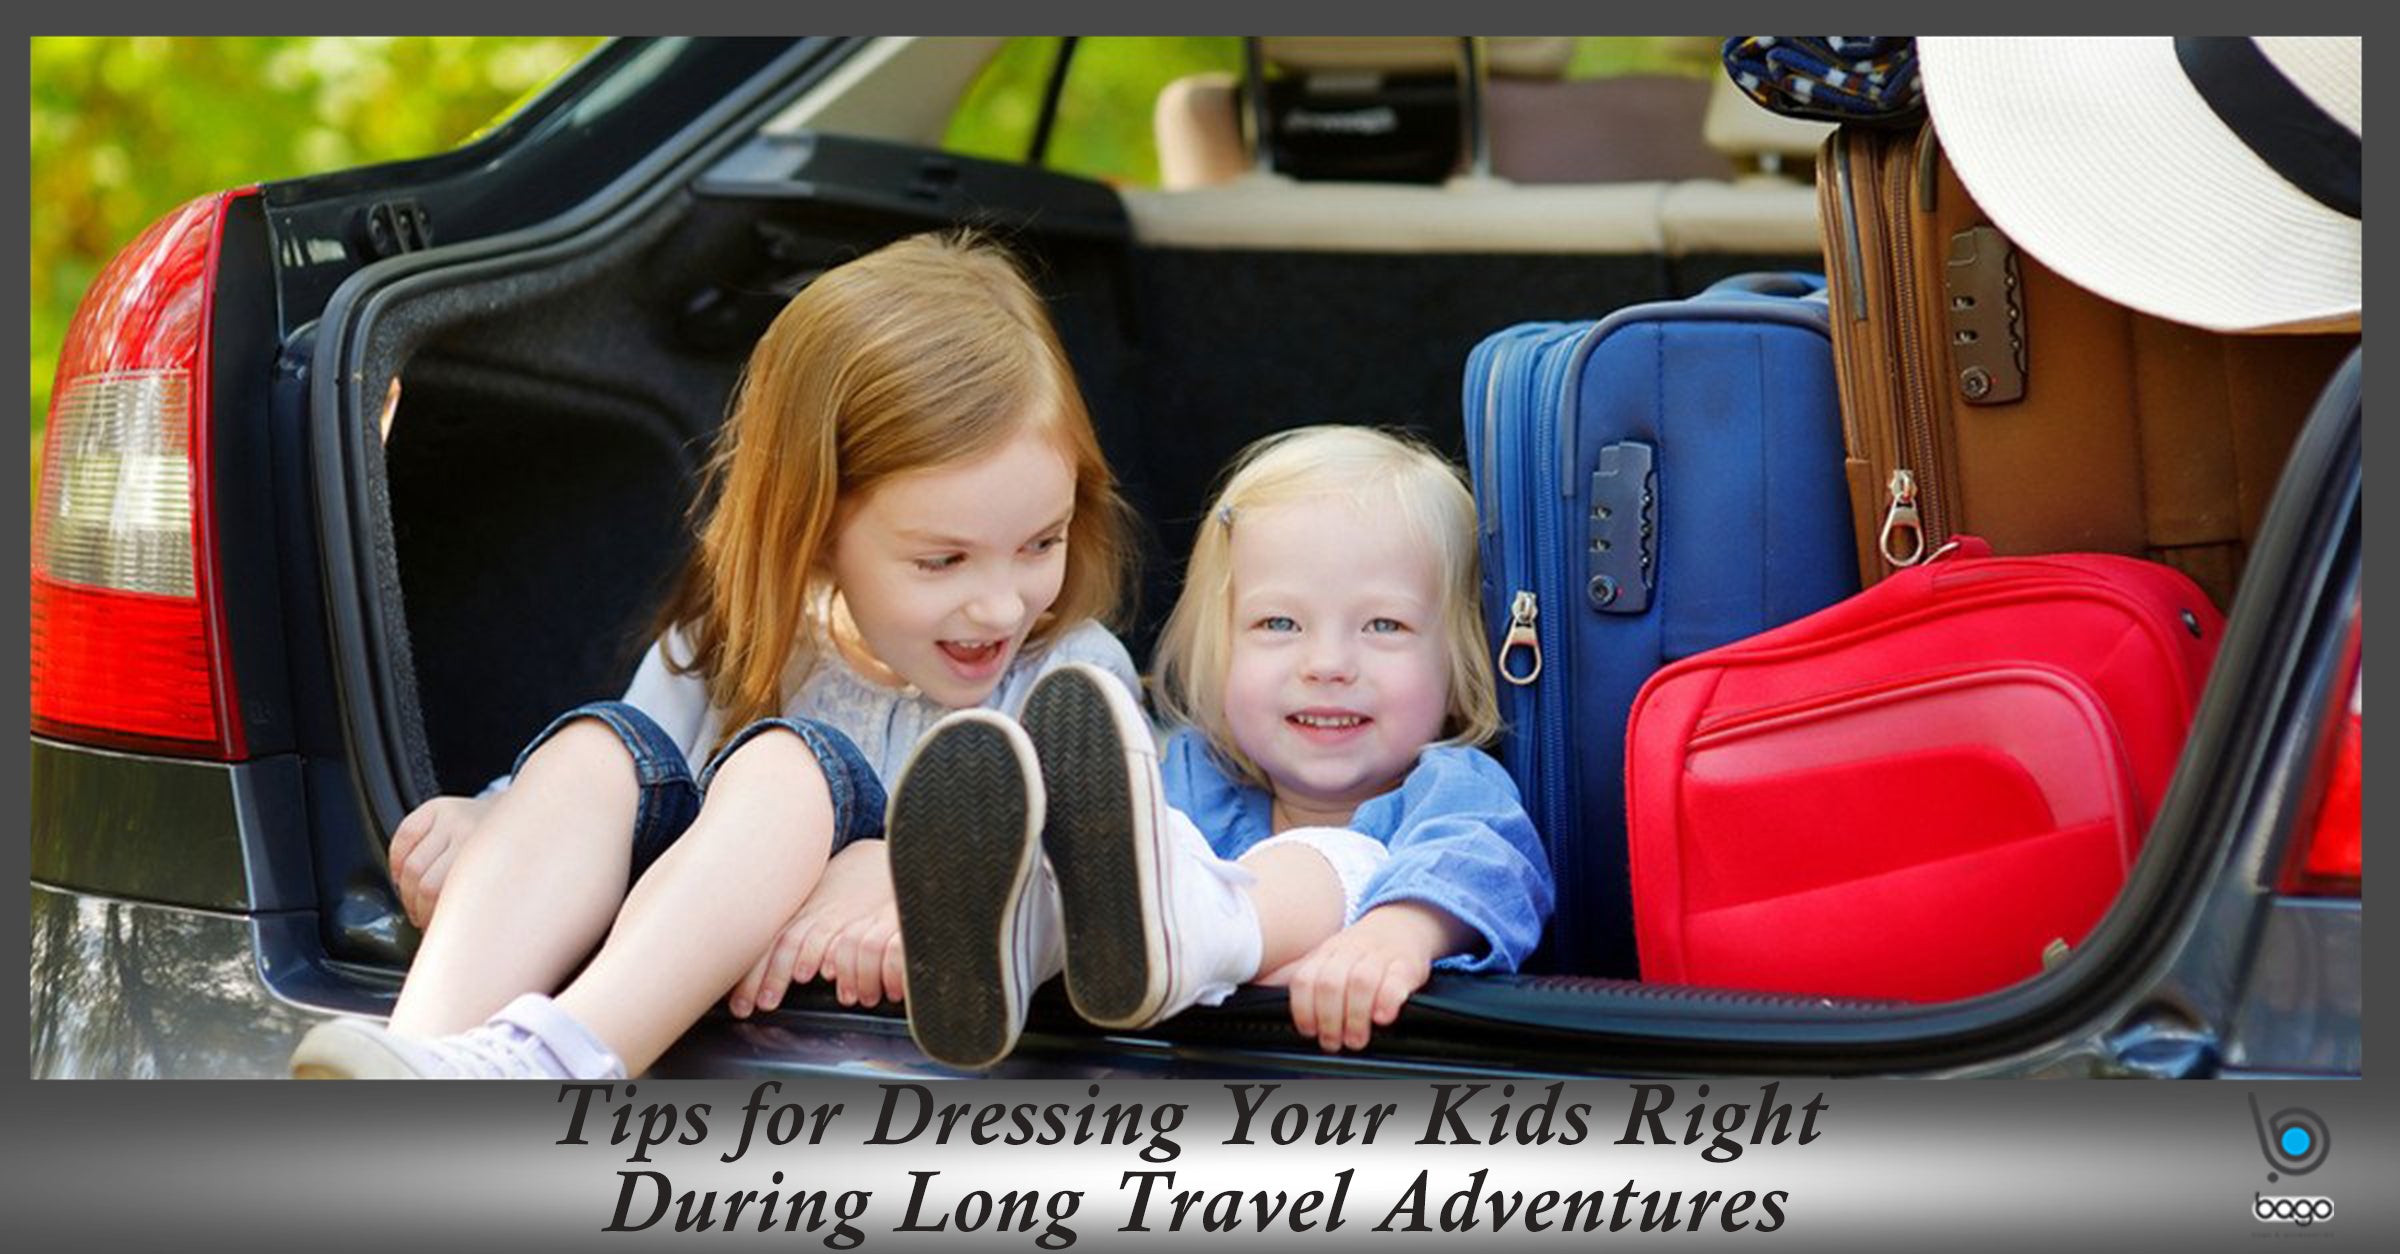 Tips for Dressing Your Kids Right During Long Travel Adventures